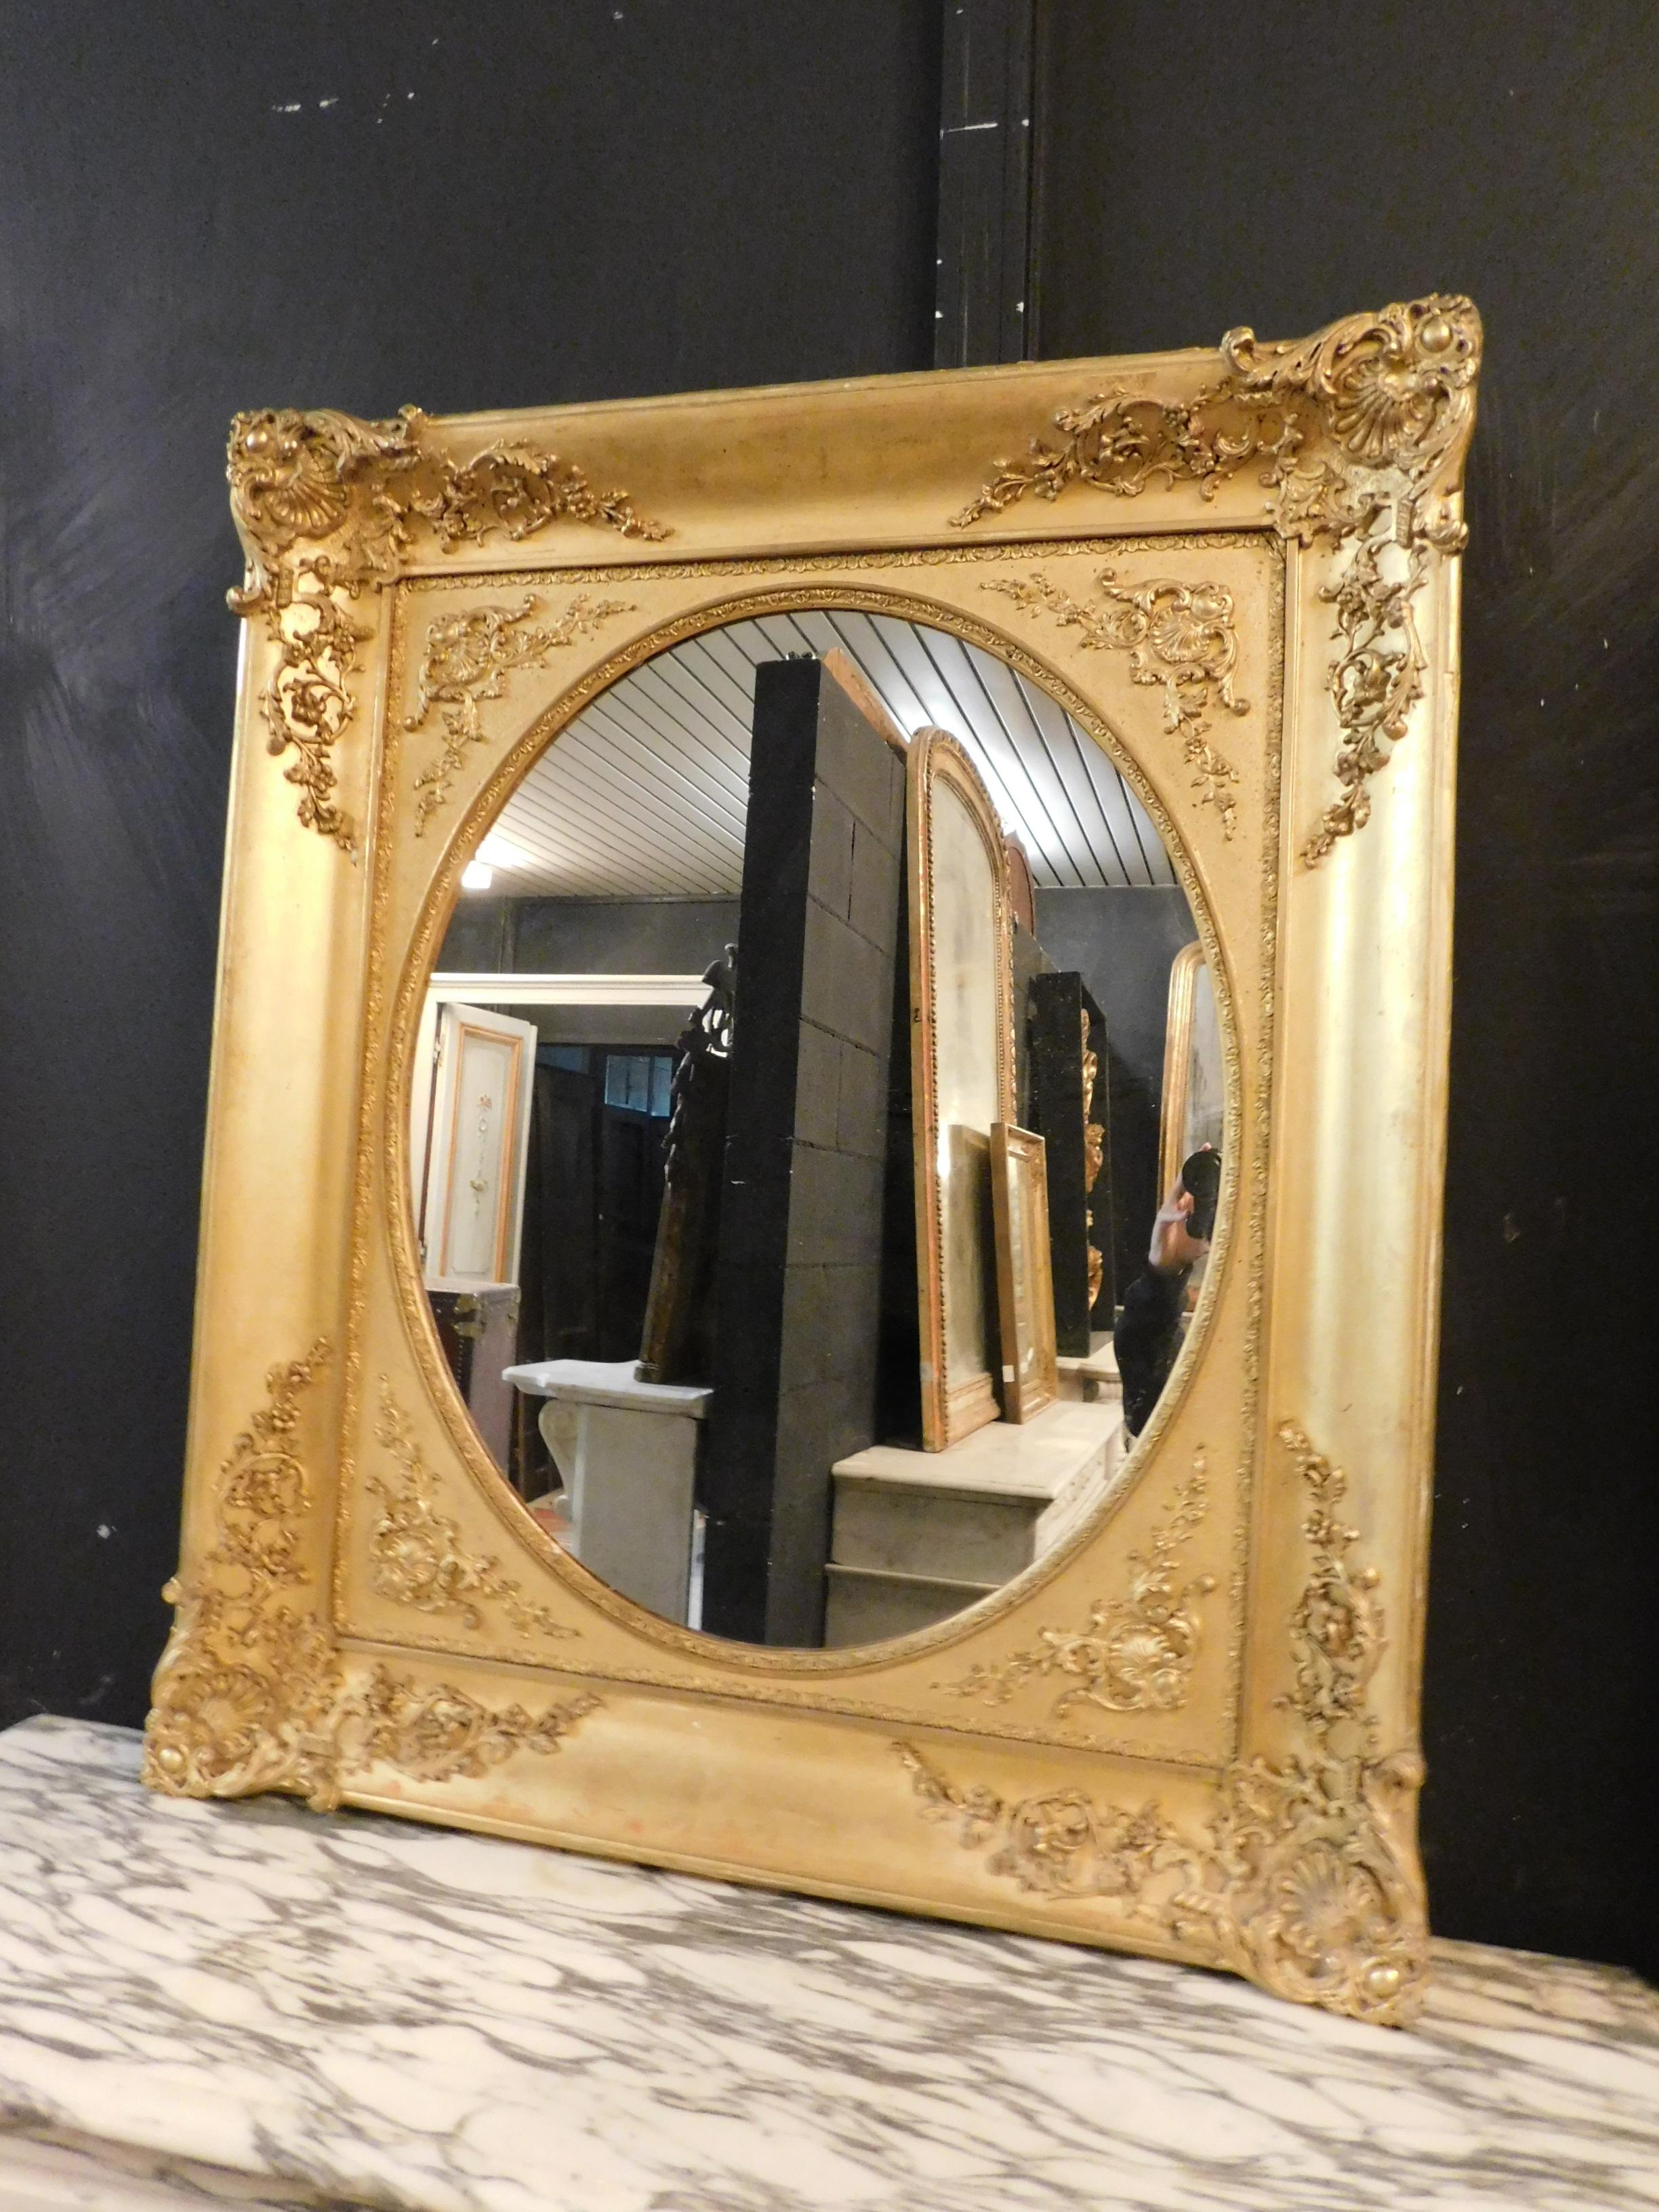 Antique golden mirror, richly carved by hand with beautiful details in the frame, rectangular in shape but with oval mirror, from the 19th century, from Piedmont (Italy), ideal to be installed in many environments such as entrances, offices,